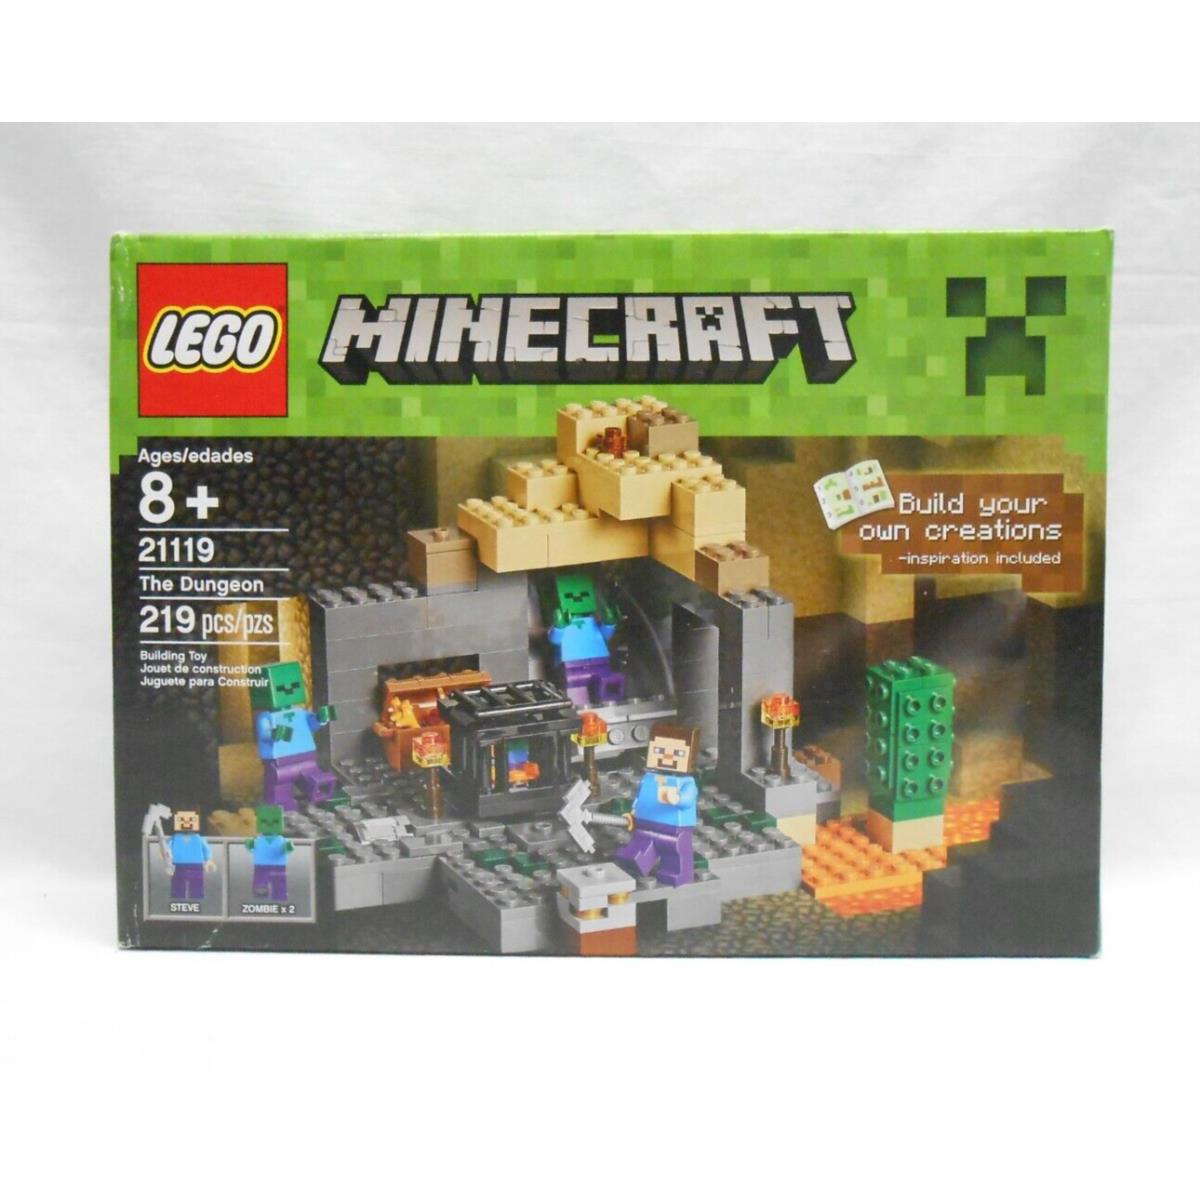 Lego Minecraft The Dungeon Building Toy Kit 21119 219 Pcs Retired